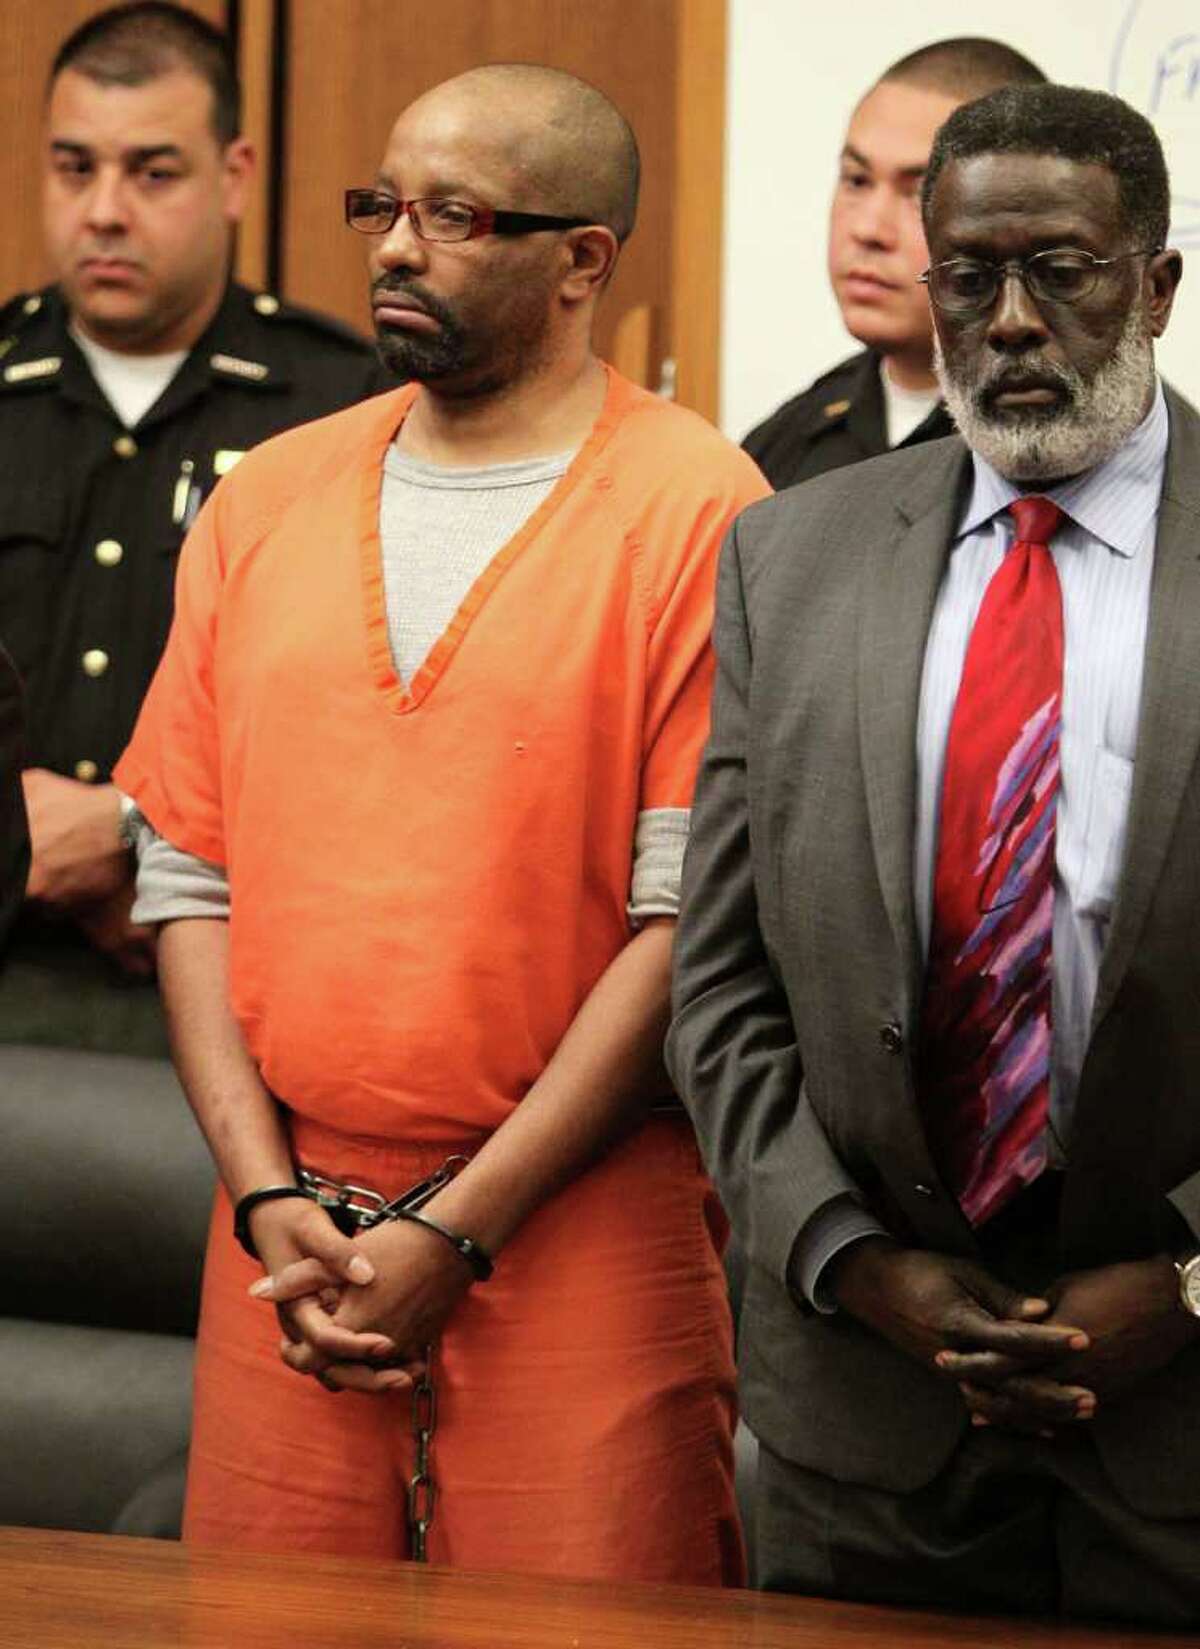 Anthony Sowell, left, stands with his attorney Rufus Sims as they listen as the jury recommends the death penalty Wednesday, August 10, 2011 in Cleveland. Sowell, who was convicted July 22 of aggravated murder in eleven women's deaths. (AP Photo/The Plain Dealer, Marvin Fong, Pool)